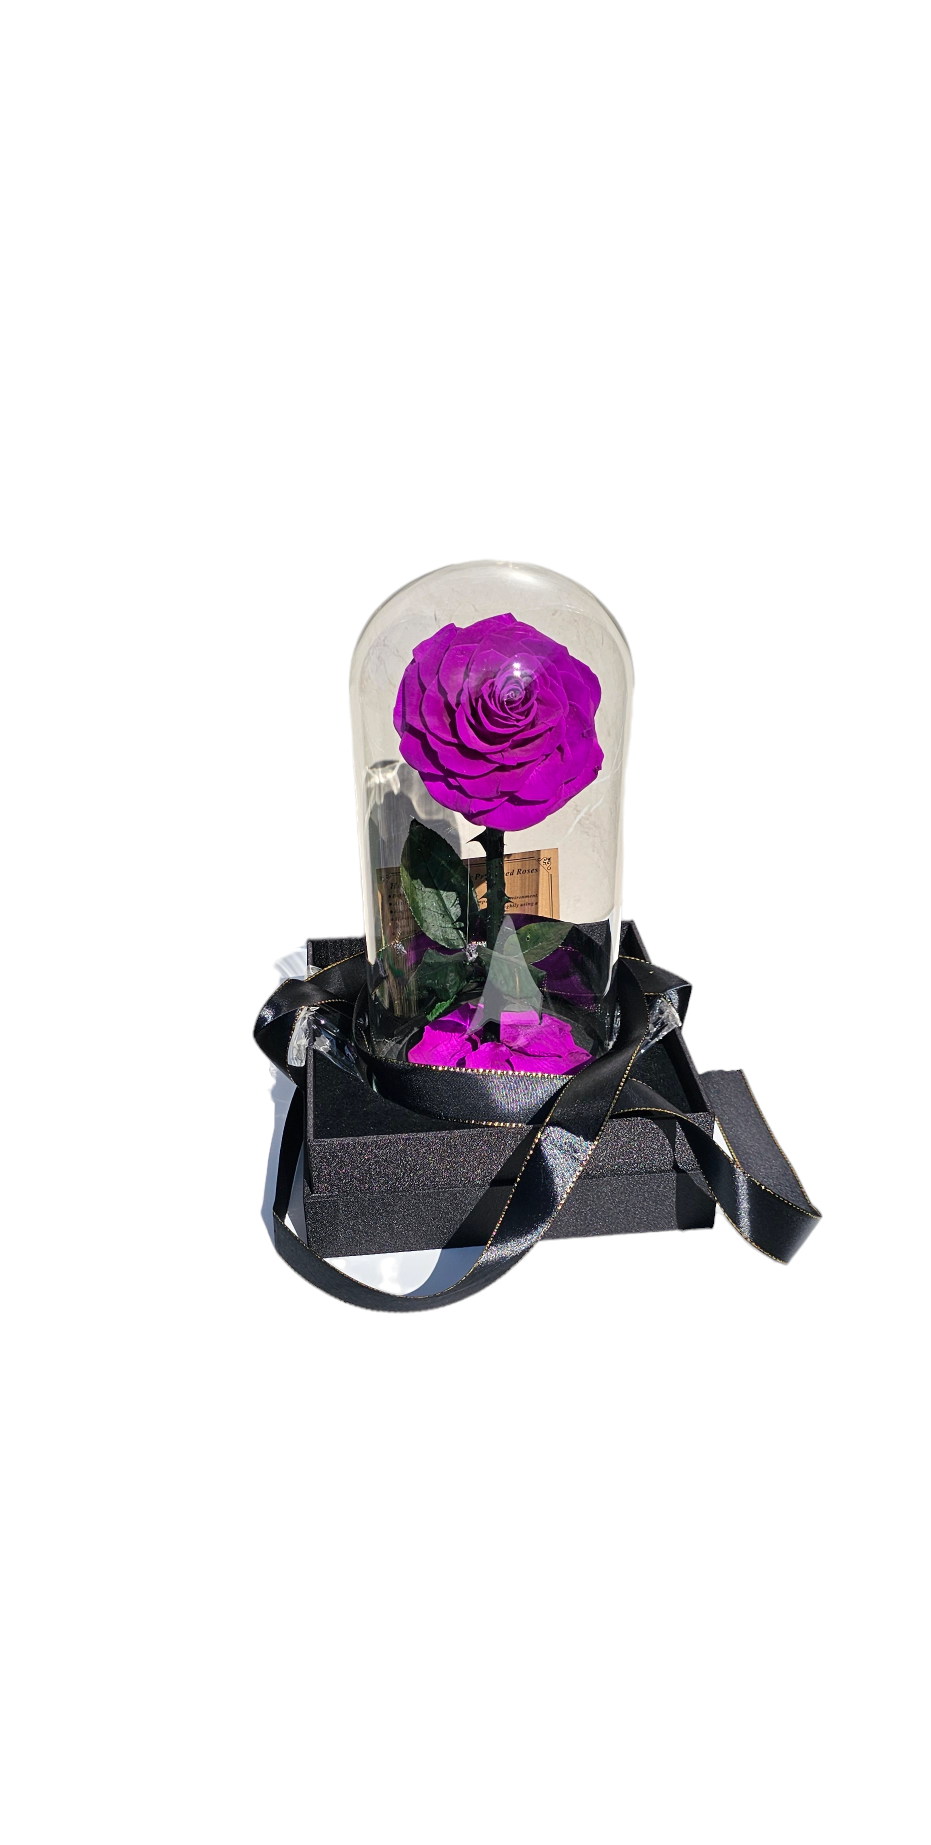 Everlasting Purple Preserved Rose Dome - Blossom  By Daisy